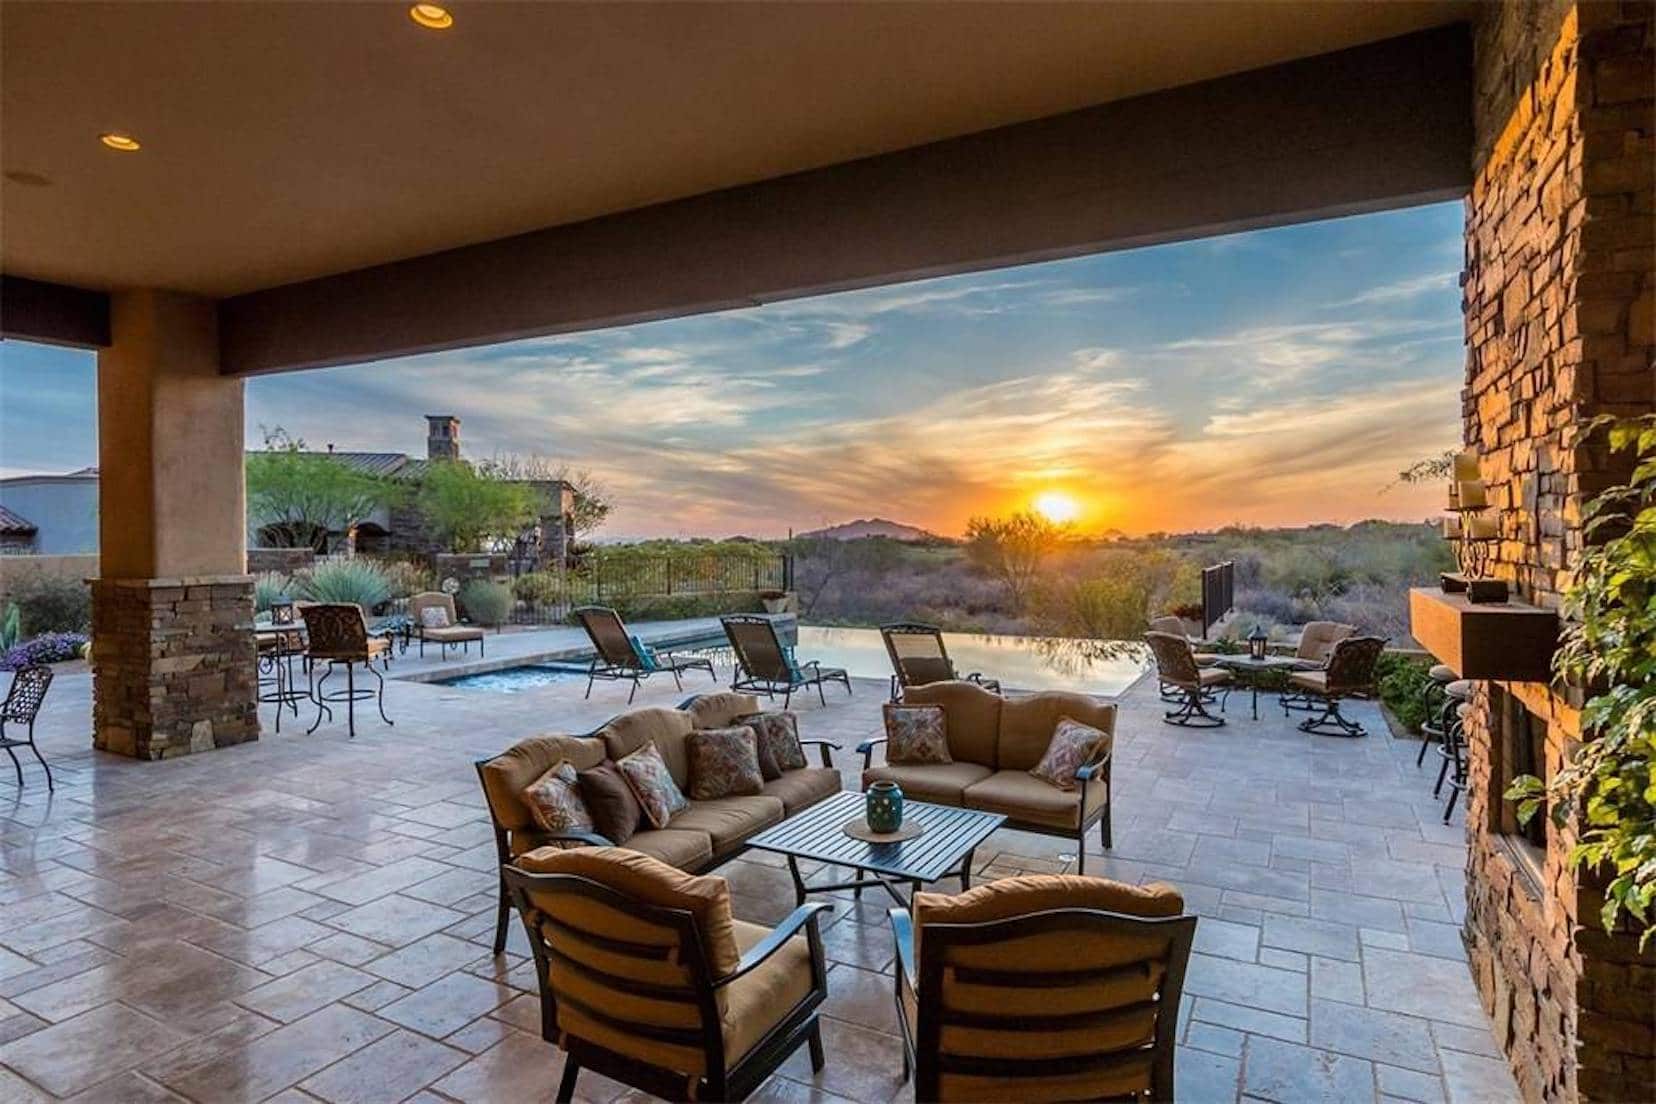 Trade-in #4: a private golf course amidst the high Sonoran desert (4-bedroom house included)